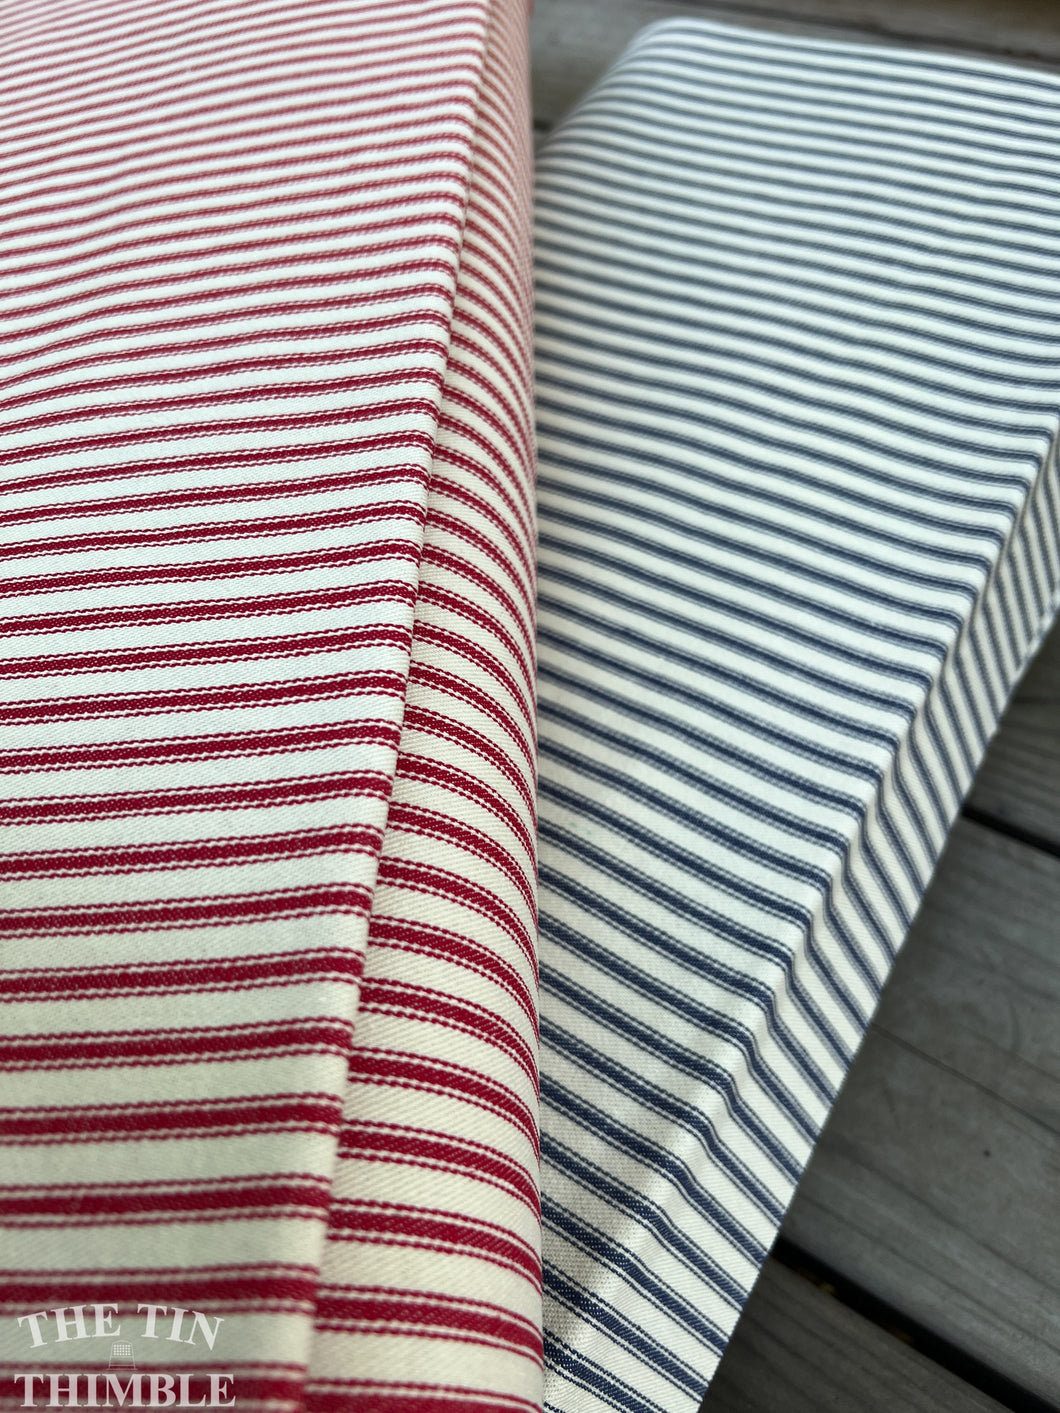 Cotton Ticking Fabric in Red or Blue Stripe Fabric / 100% Cotton Ticking - 1 Yard - Cotton Fabric / Canvas Weight / Home Decorator Weight